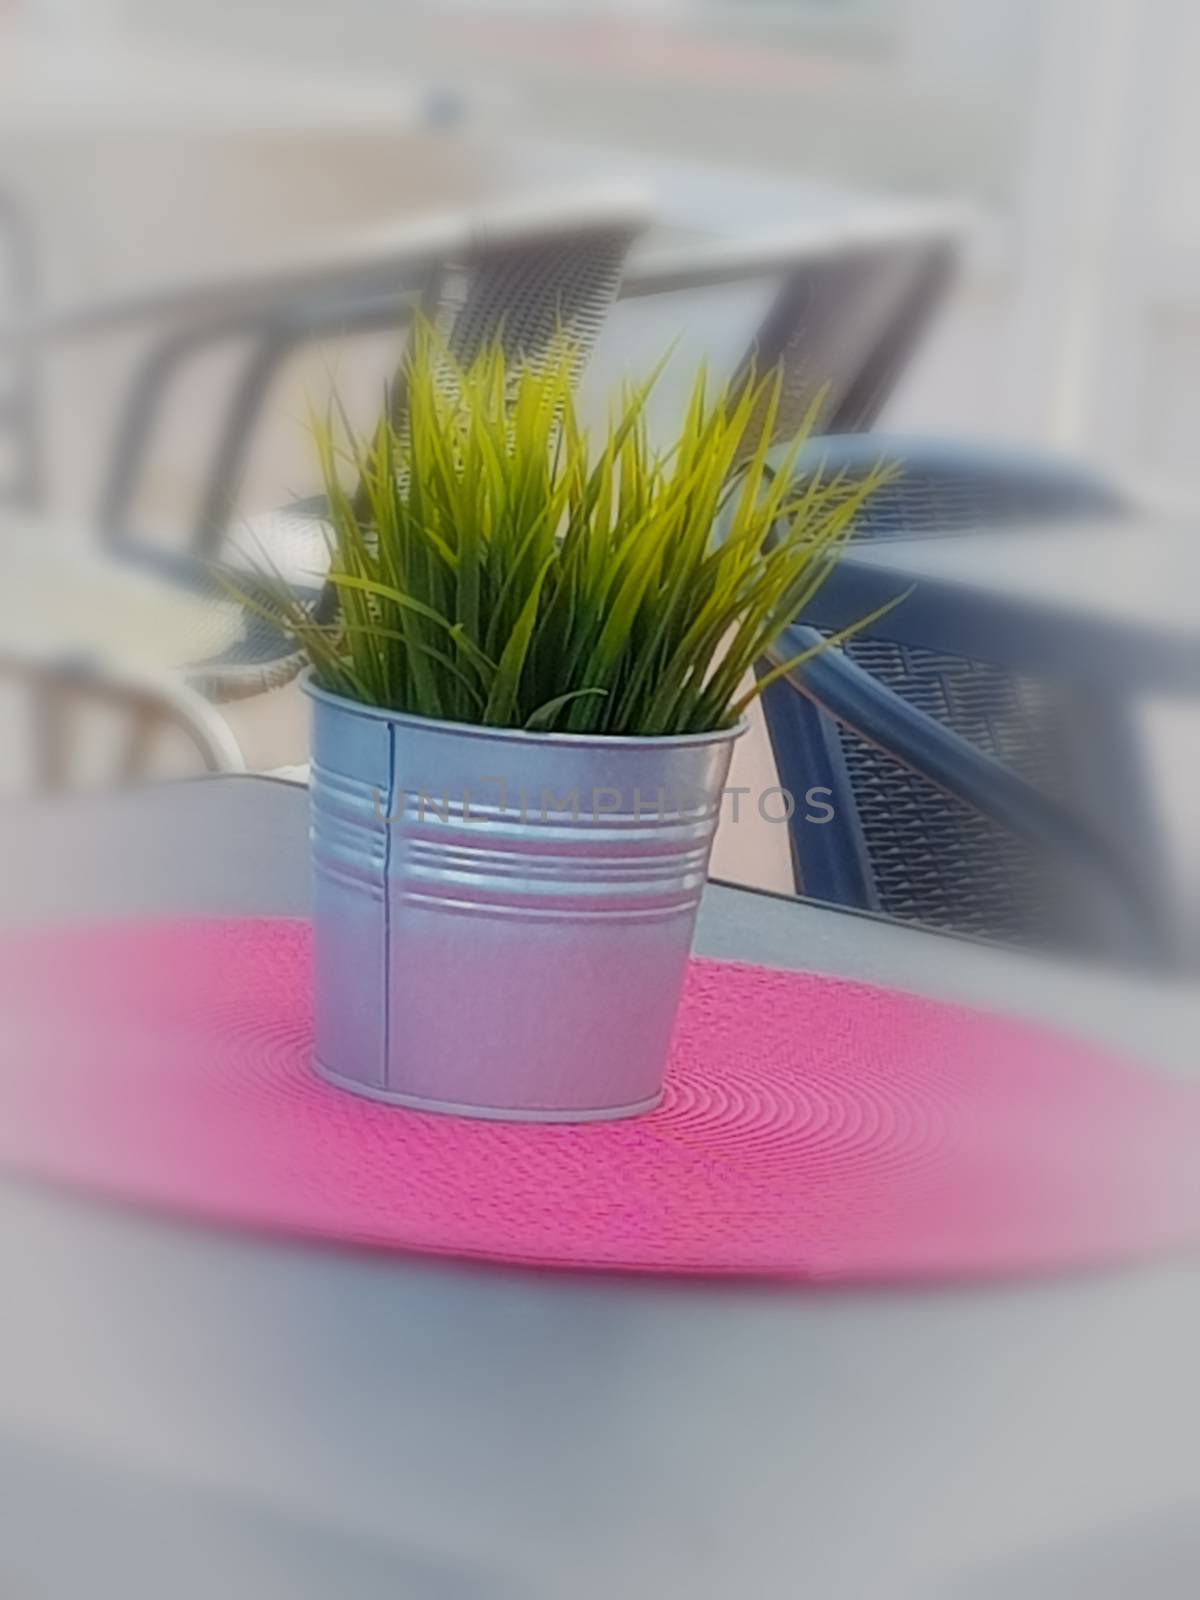 Flowerpot on a blurred background with vignetting